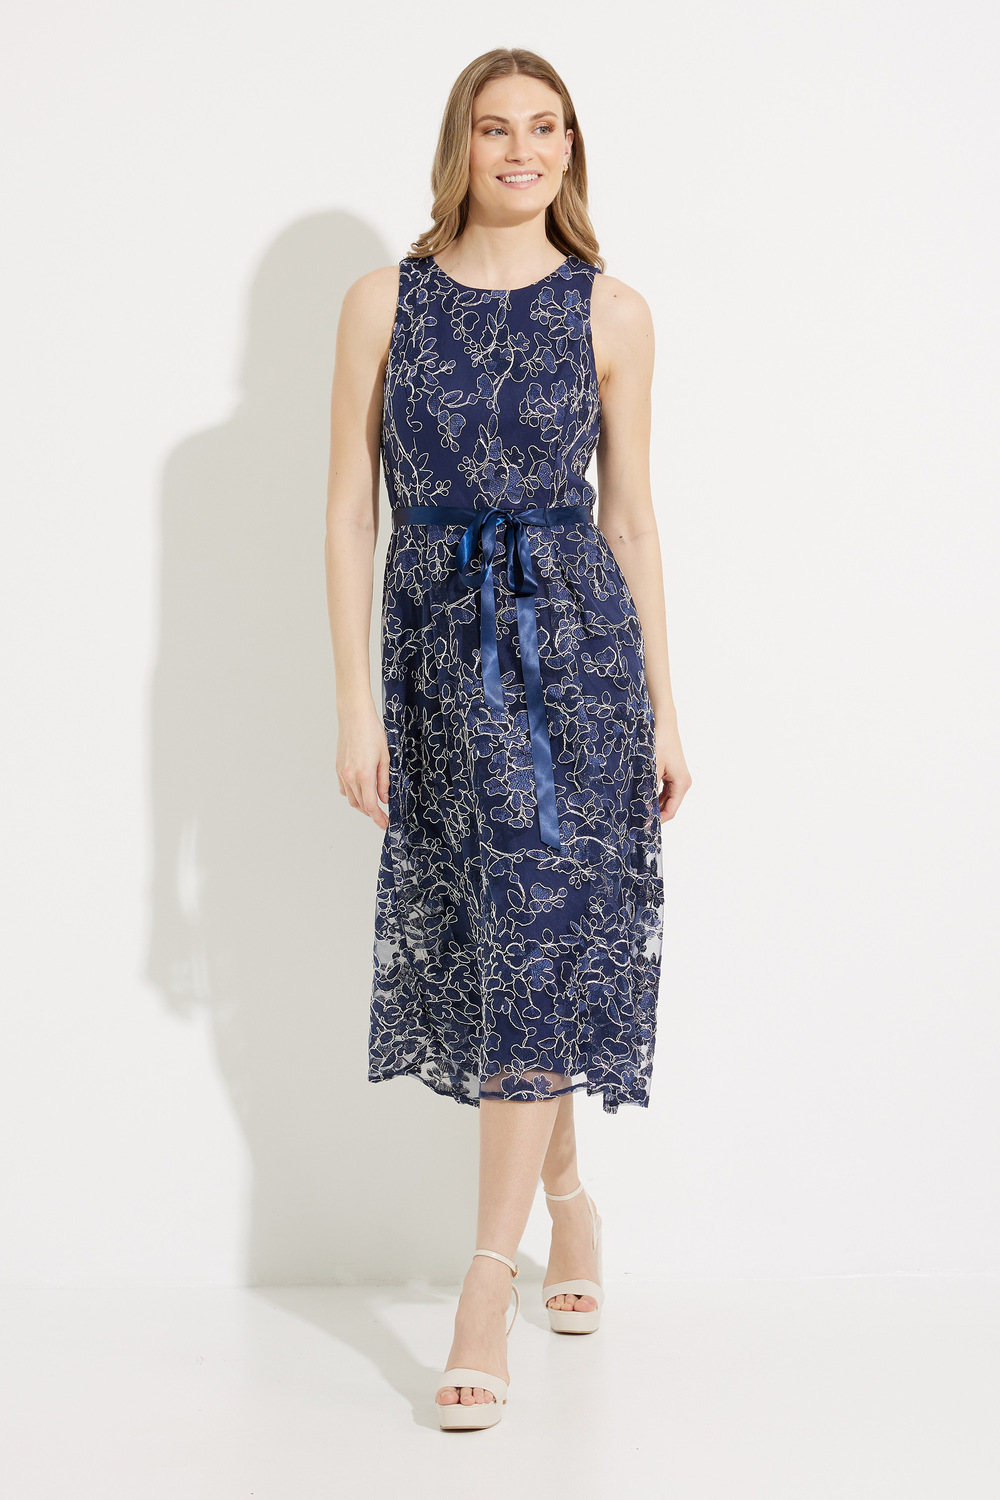 Embroidered Floral Dress Style J1171290. Navy